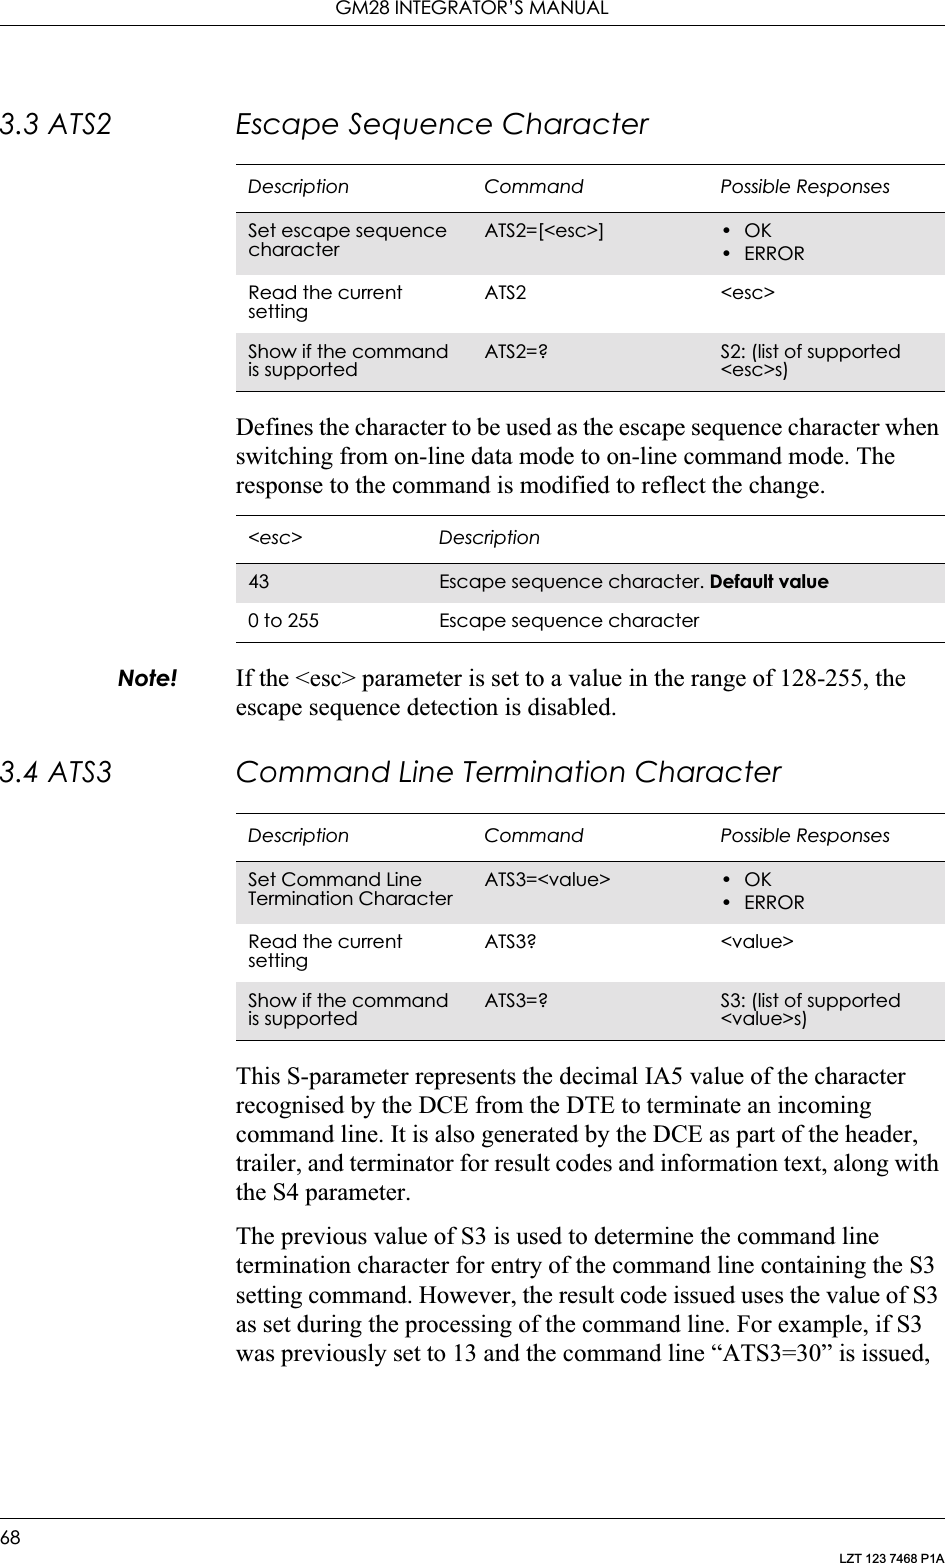 GM28 INTEGRATOR’S MANUAL68LZT 123 7468 P1A3.3 ATS2 Escape Sequence CharacterDefines the character to be used as the escape sequence character when switching from on-line data mode to on-line command mode. The response to the command is modified to reflect the change.Note! If the &lt;esc&gt; parameter is set to a value in the range of 128-255, the escape sequence detection is disabled.3.4 ATS3 Command Line Termination CharacterThis S-parameter represents the decimal IA5 value of the character recognised by the DCE from the DTE to terminate an incoming command line. It is also generated by the DCE as part of the header, trailer, and terminator for result codes and information text, along with the S4 parameter.The previous value of S3 is used to determine the command line termination character for entry of the command line containing the S3 setting command. However, the result code issued uses the value of S3 as set during the processing of the command line. For example, if S3 was previously set to 13 and the command line “ATS3=30” is issued, Description Command Possible ResponsesSet escape sequence characterATS2=[&lt;esc&gt;] •OK•ERRORRead the current settingATS2 &lt;esc&gt;Show if the command is supportedATS2=? S2: (list of supported &lt;esc&gt;s)&lt;esc&gt; Description43 Escape sequence character. Default value0 to 255 Escape sequence characterDescription Command Possible ResponsesSet Command Line Termination CharacterATS3=&lt;value&gt; •OK•ERRORRead the current settingATS3? &lt;value&gt;Show if the command is supportedATS3=? S3: (list of supported &lt;value&gt;s)